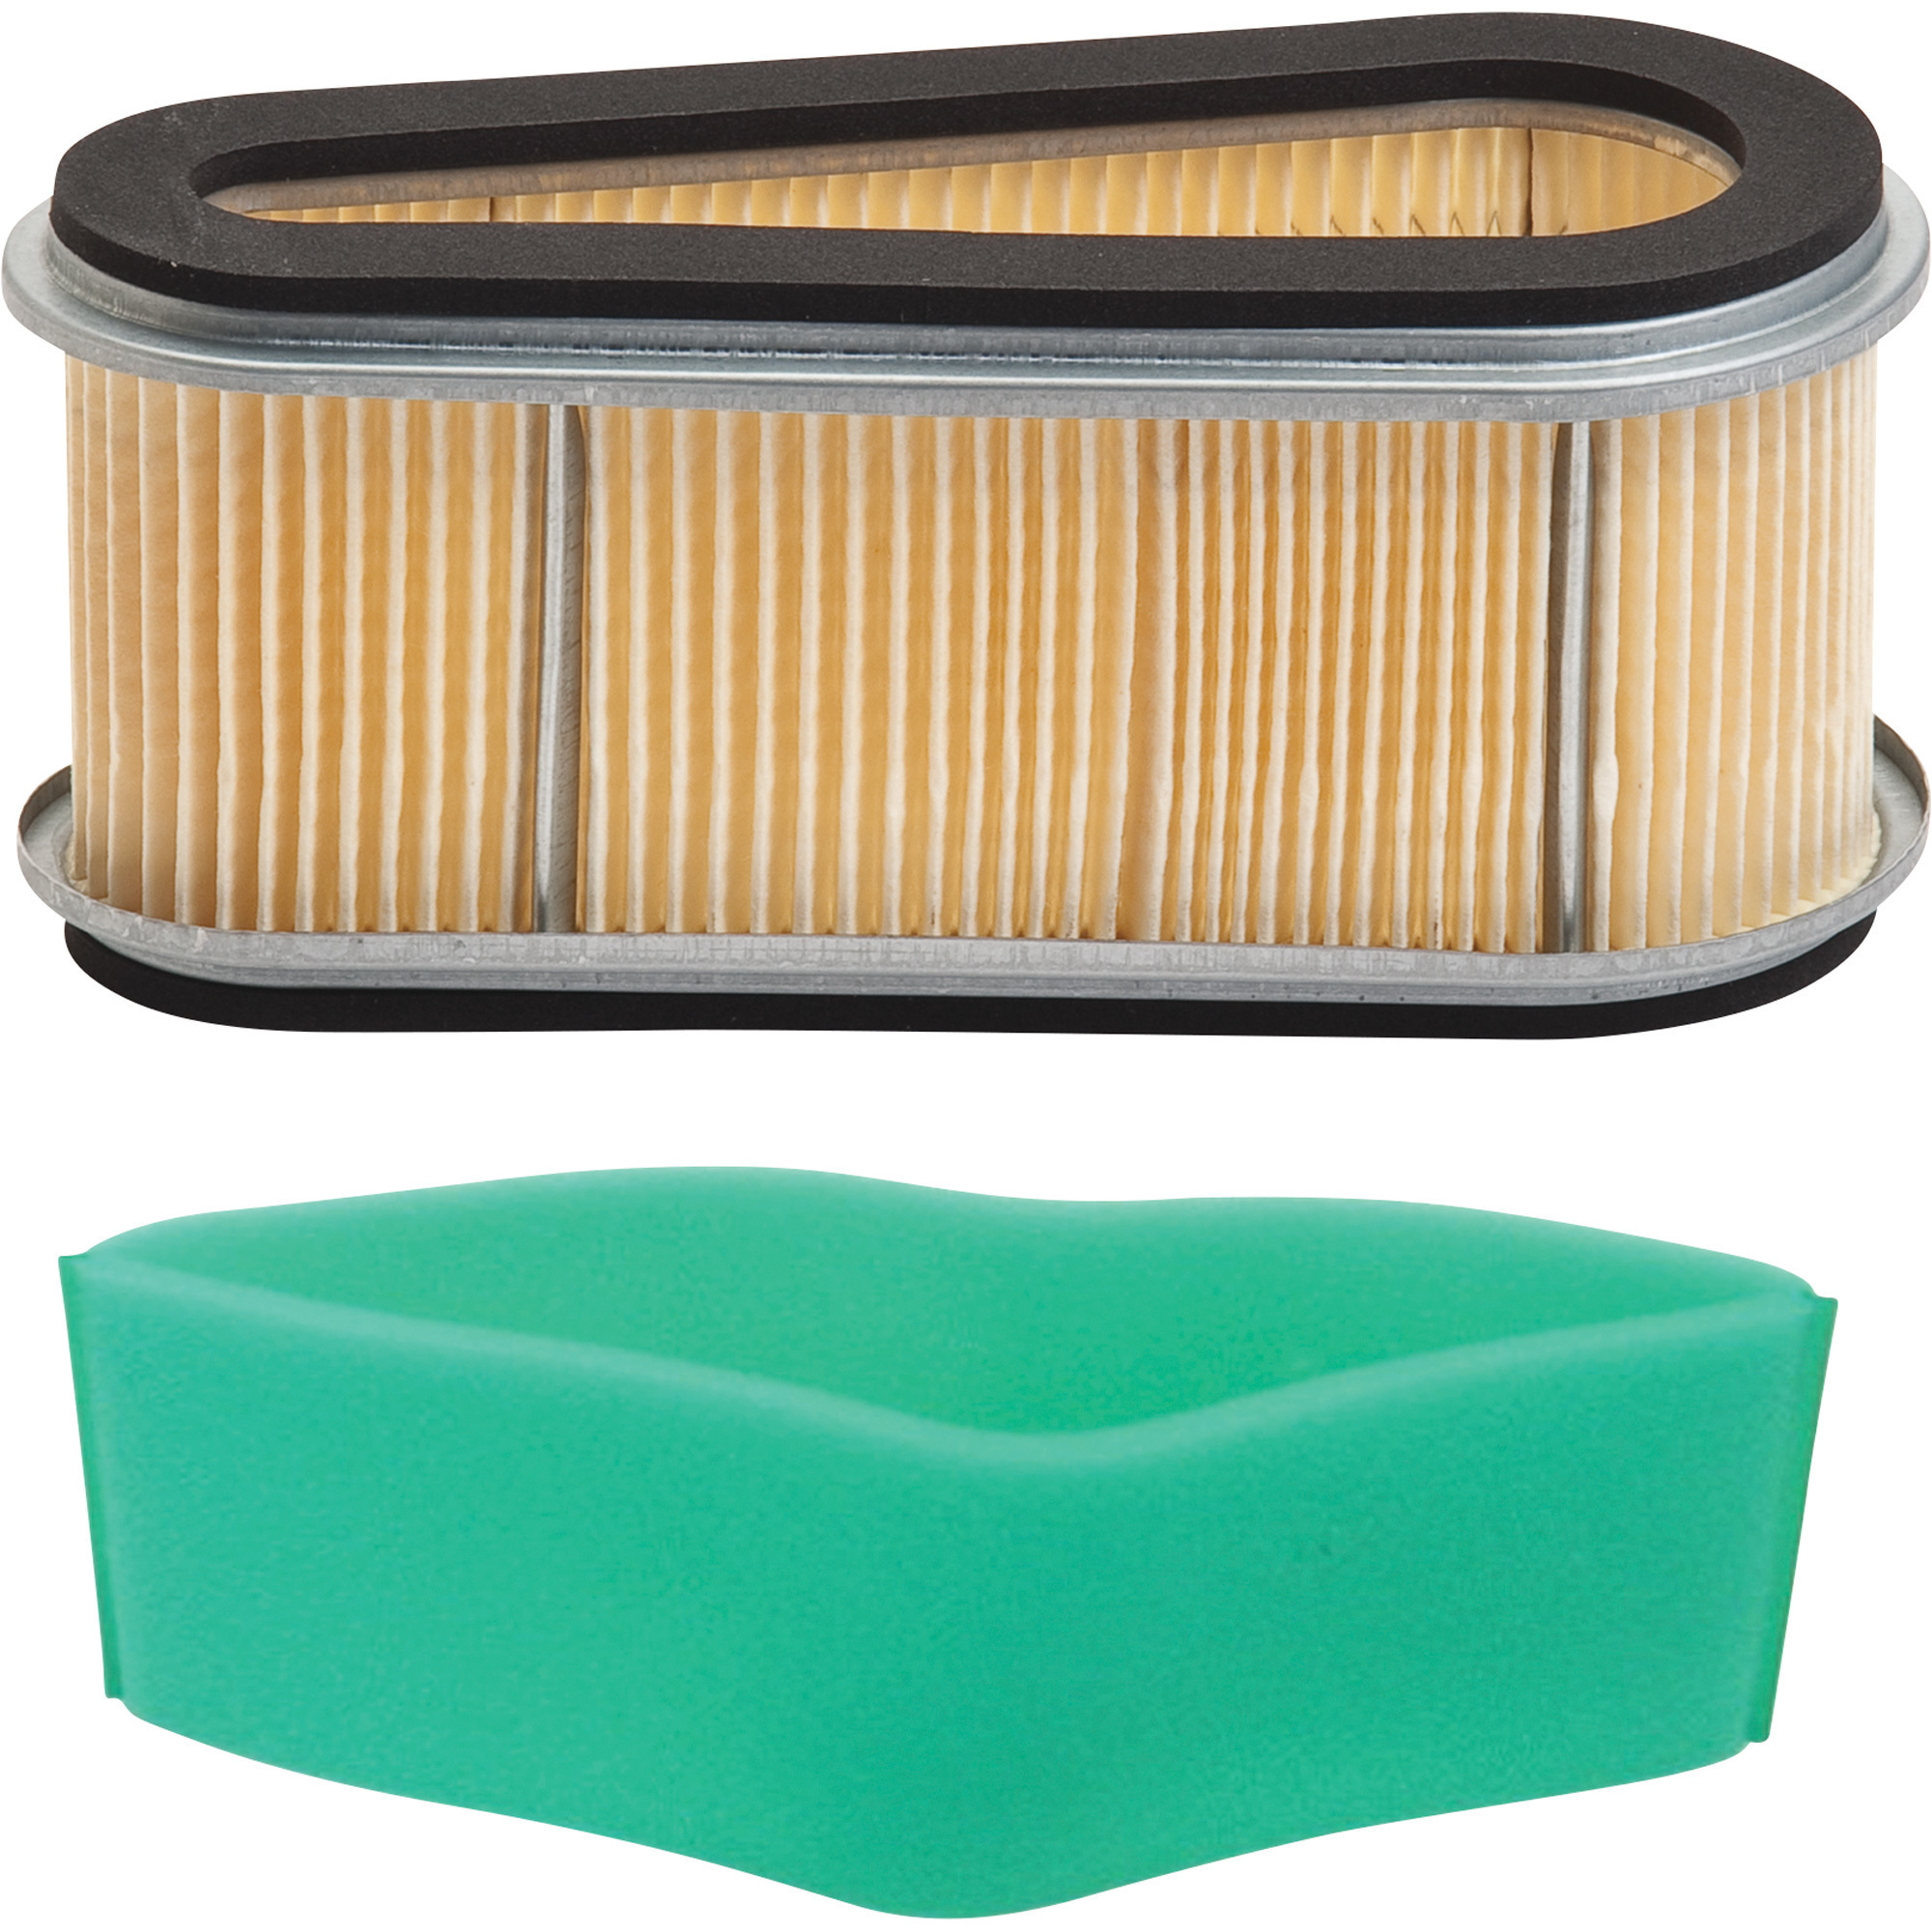 Oregon Air Filter and Pre-Cleaner Kit, Replacement for Kawasaki OEM Part#s 11013-2098 and 11013-2097, Model 30-304CSK